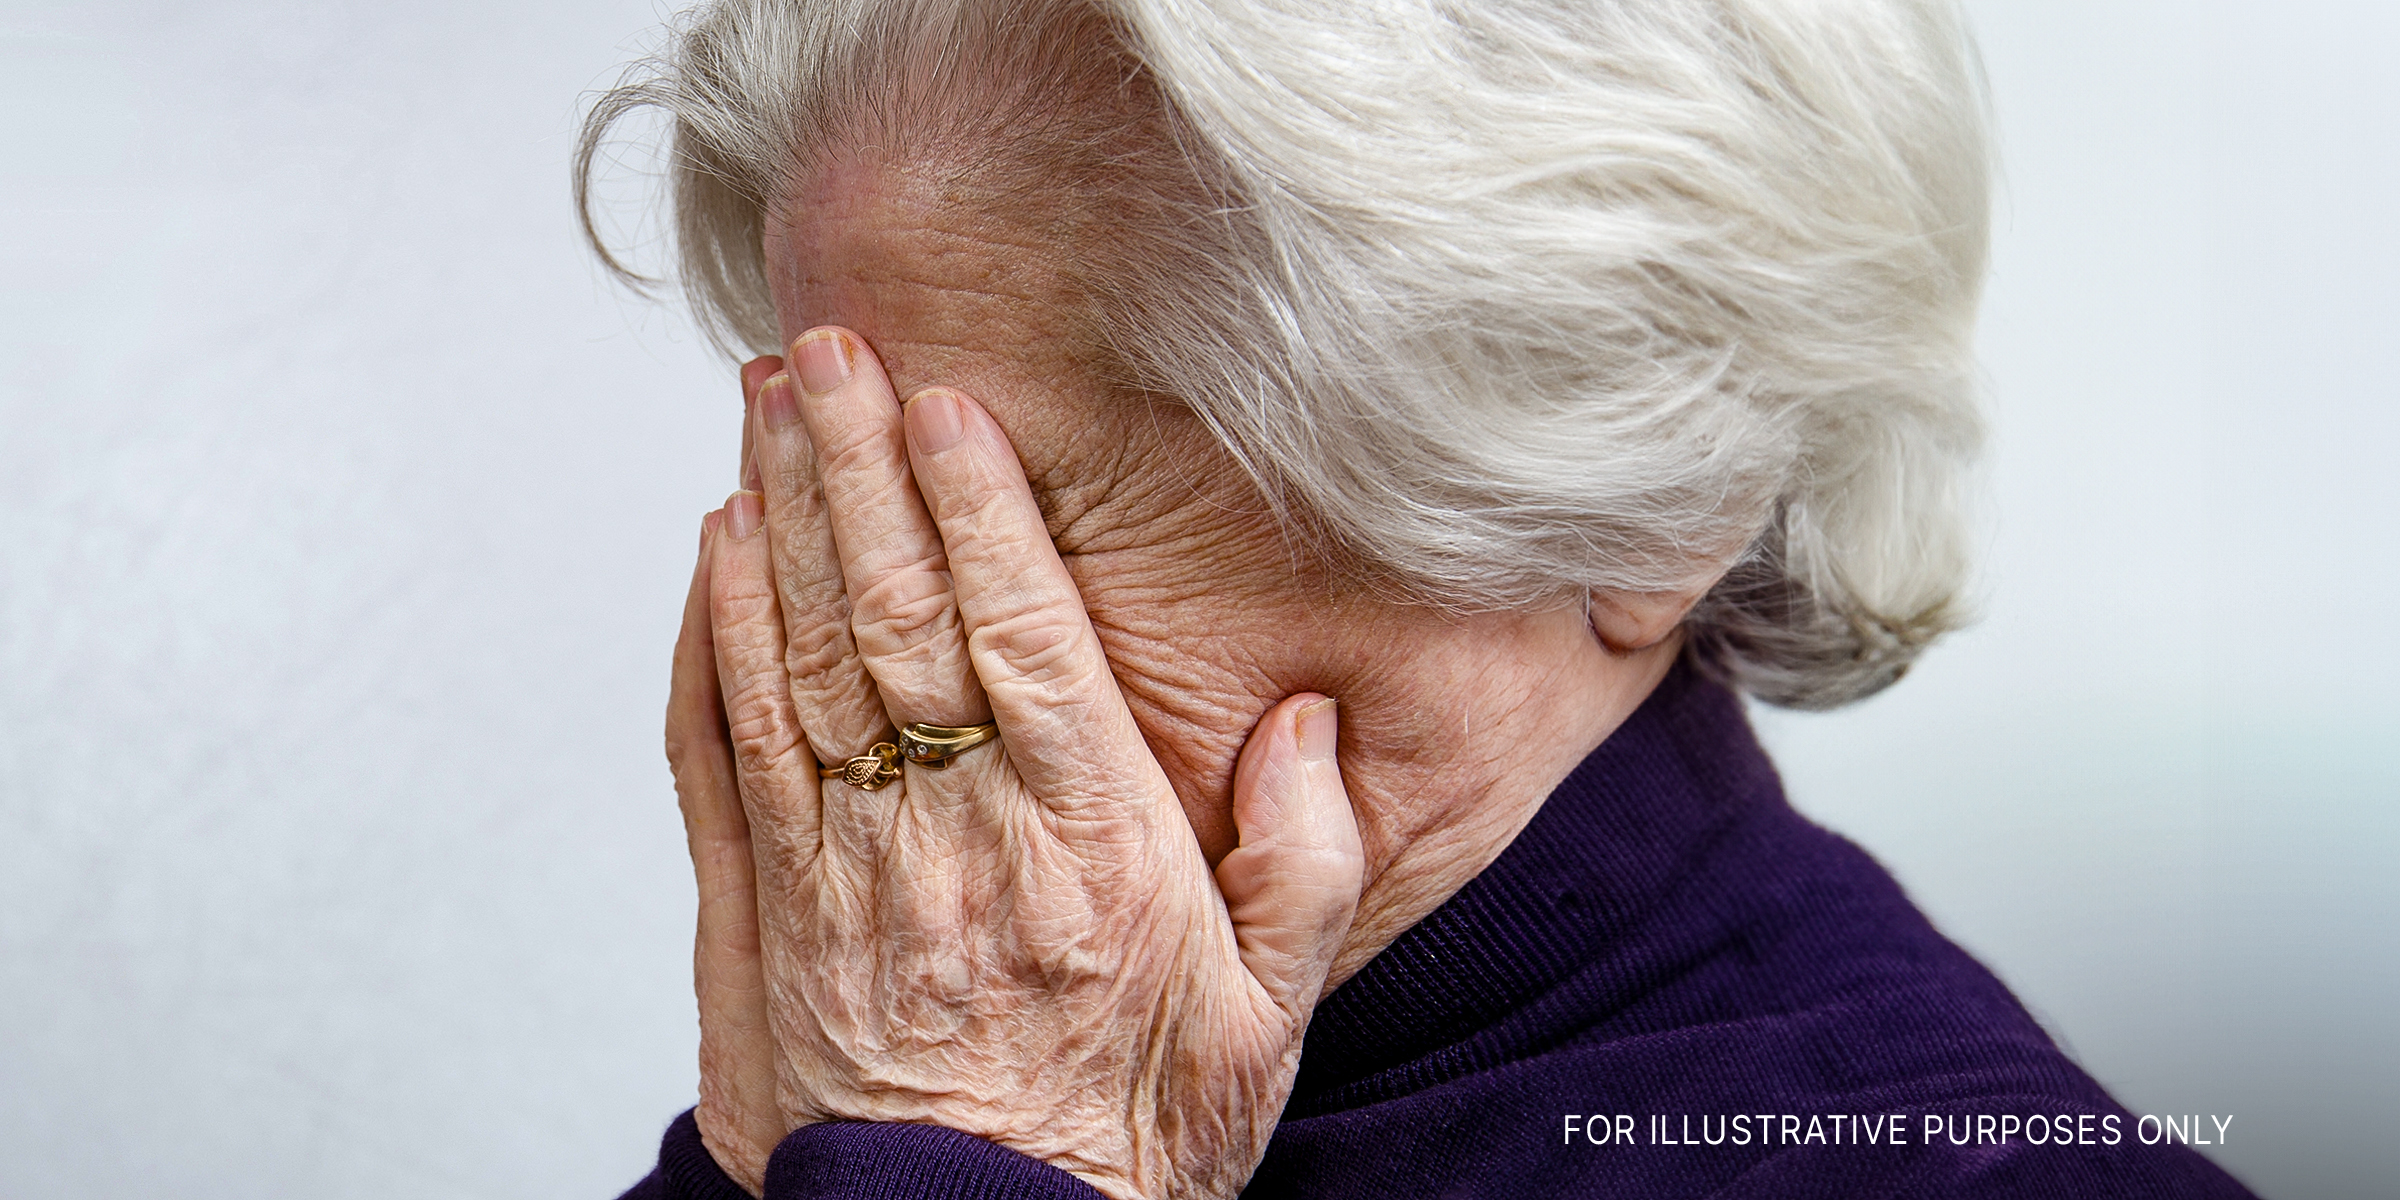 An older woman with her hands on her face | Source: Shutterstock